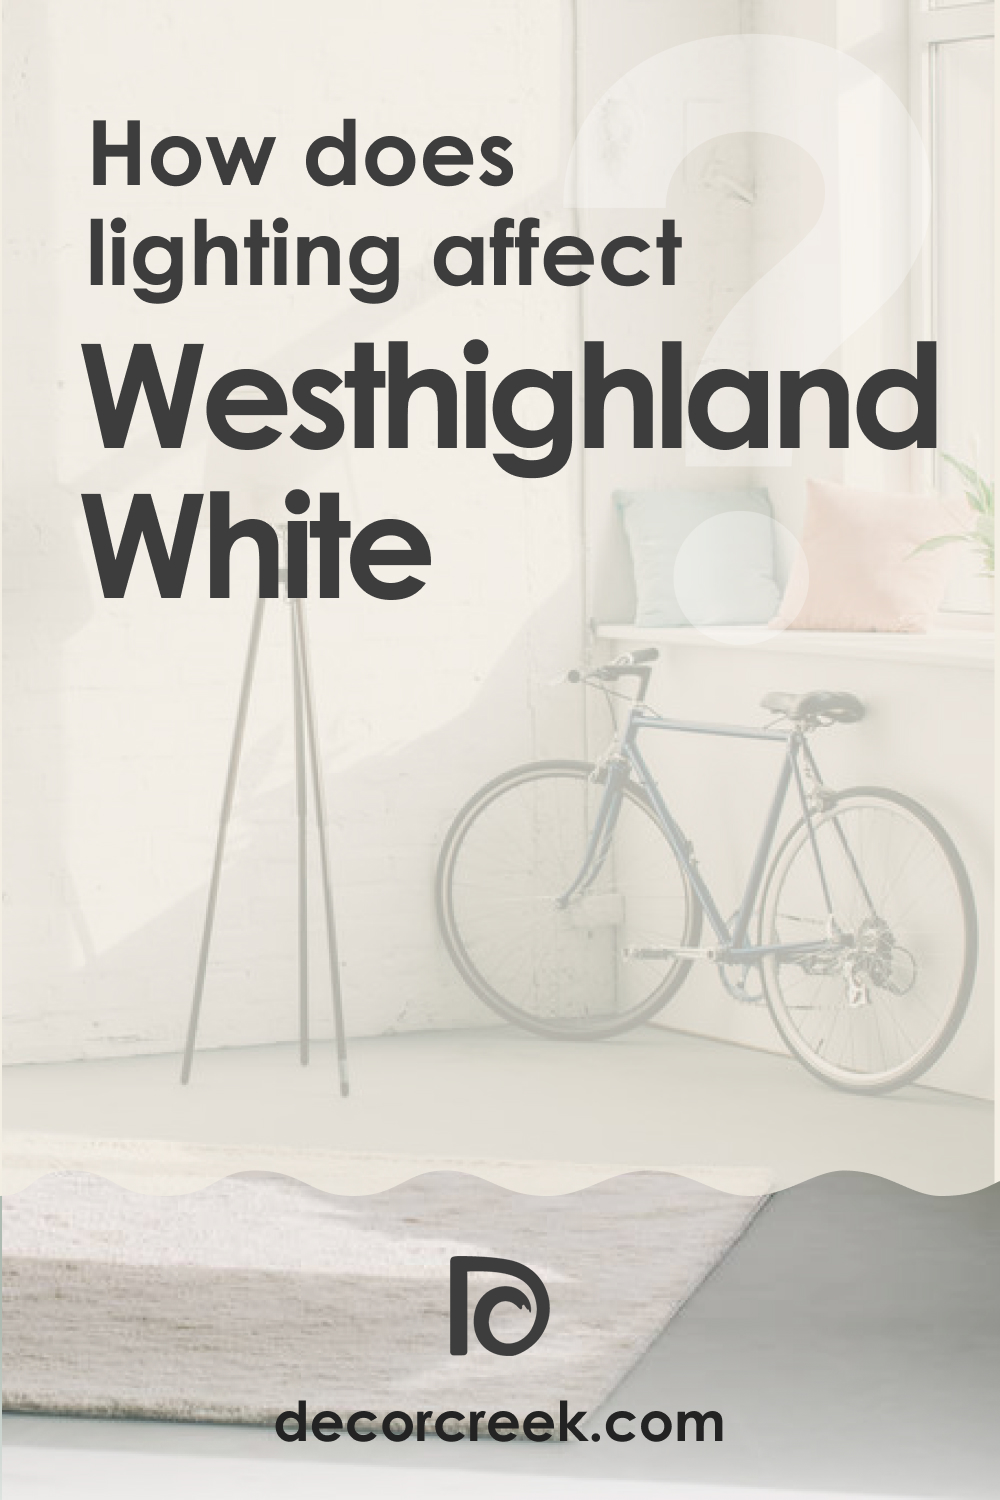 How Does Lighting Affect SW 7566 Westhighland White?